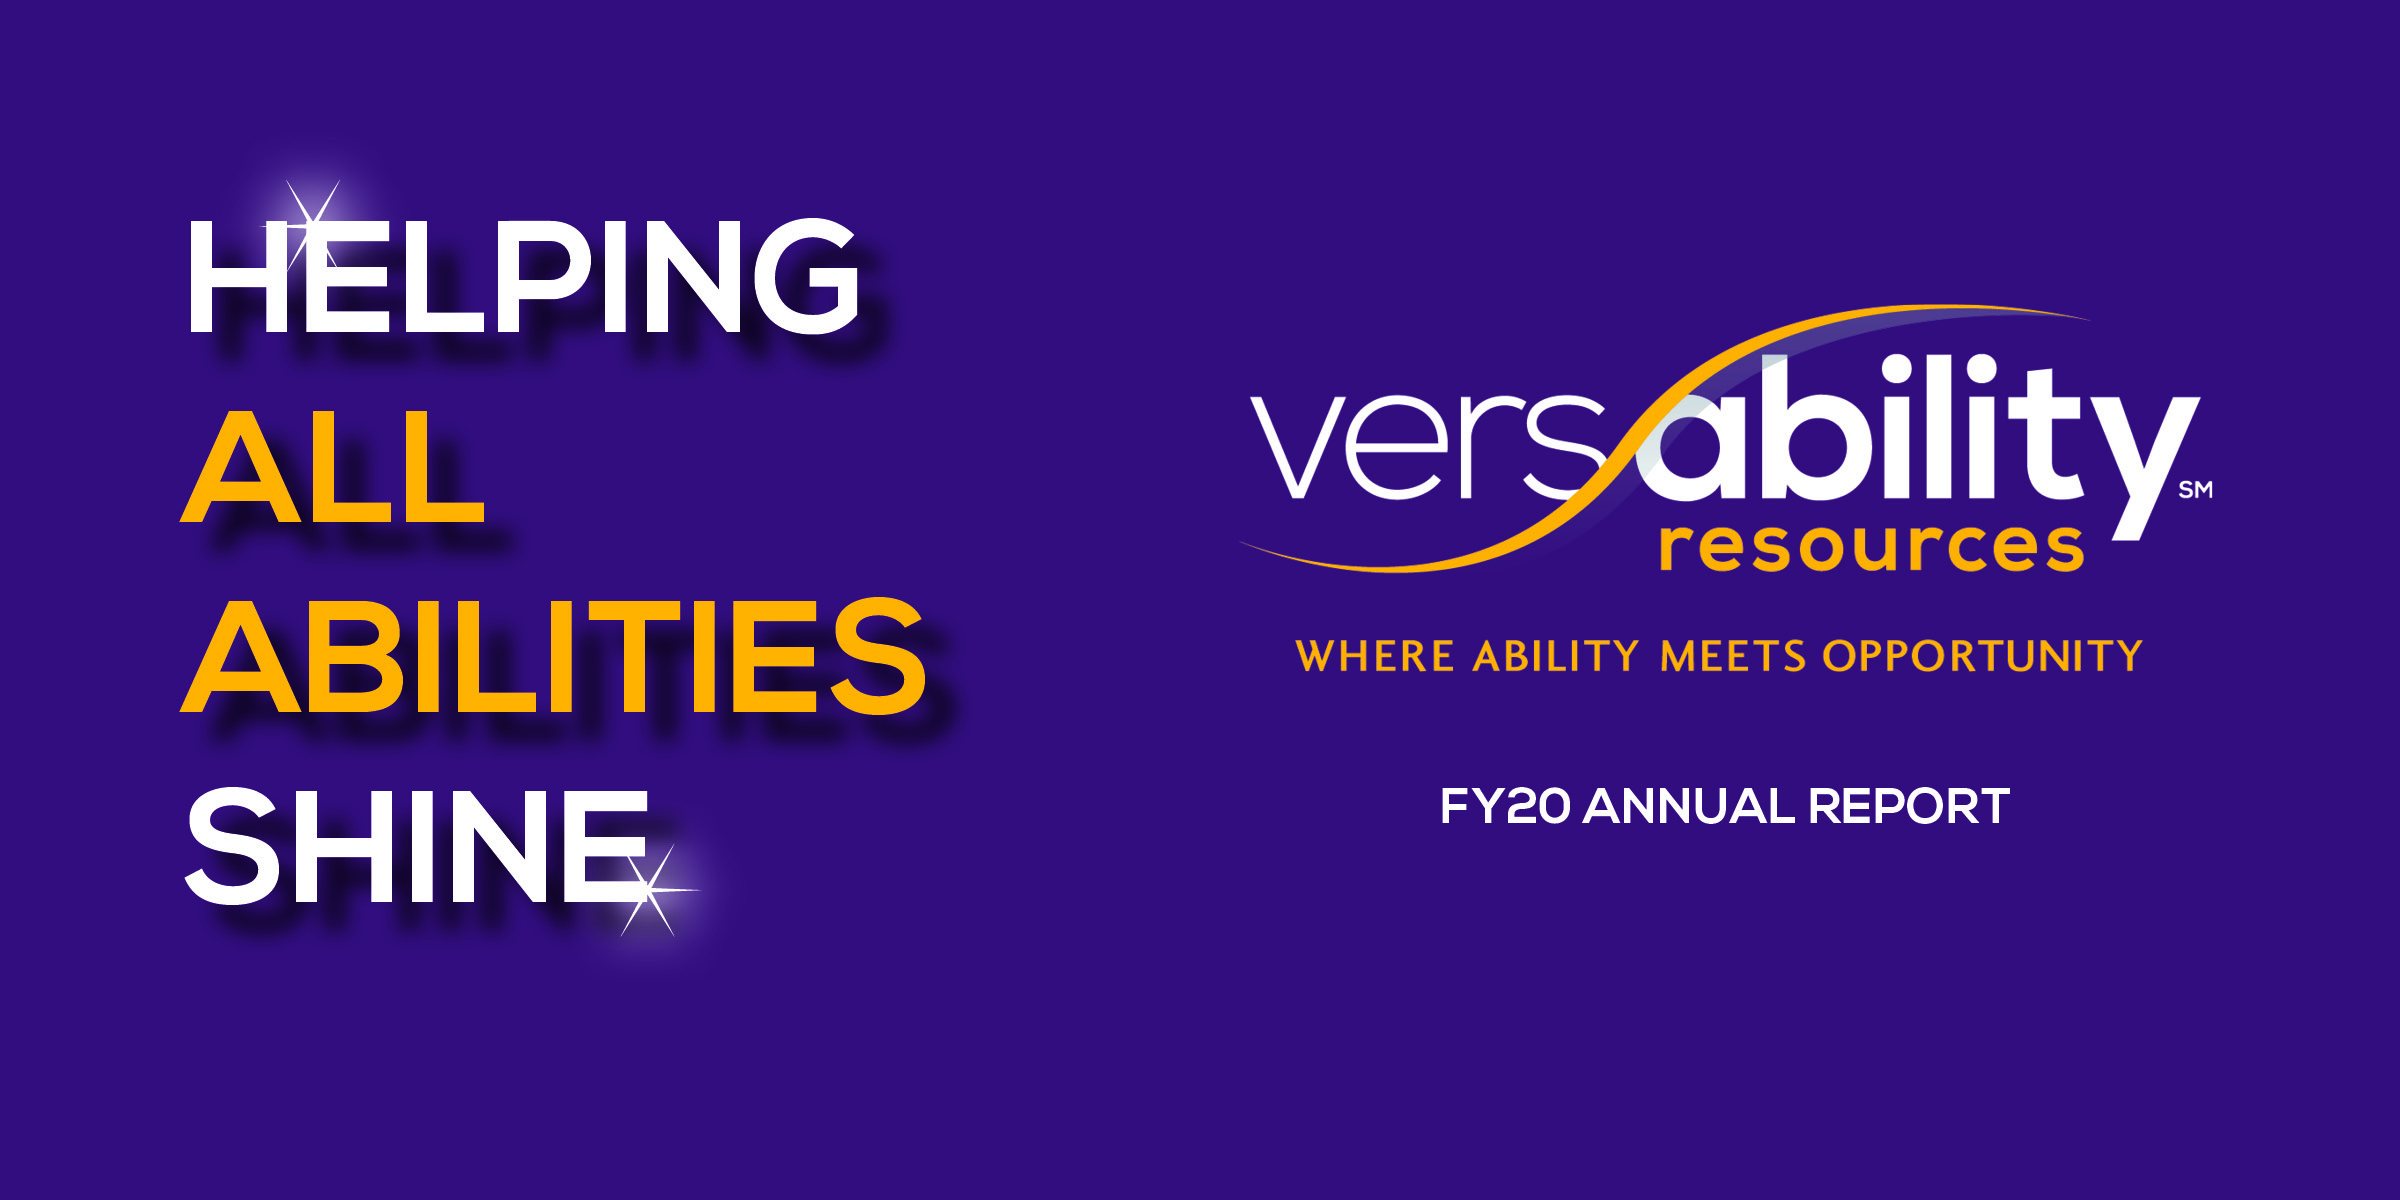 VersAbility’s FY20 Annual Report